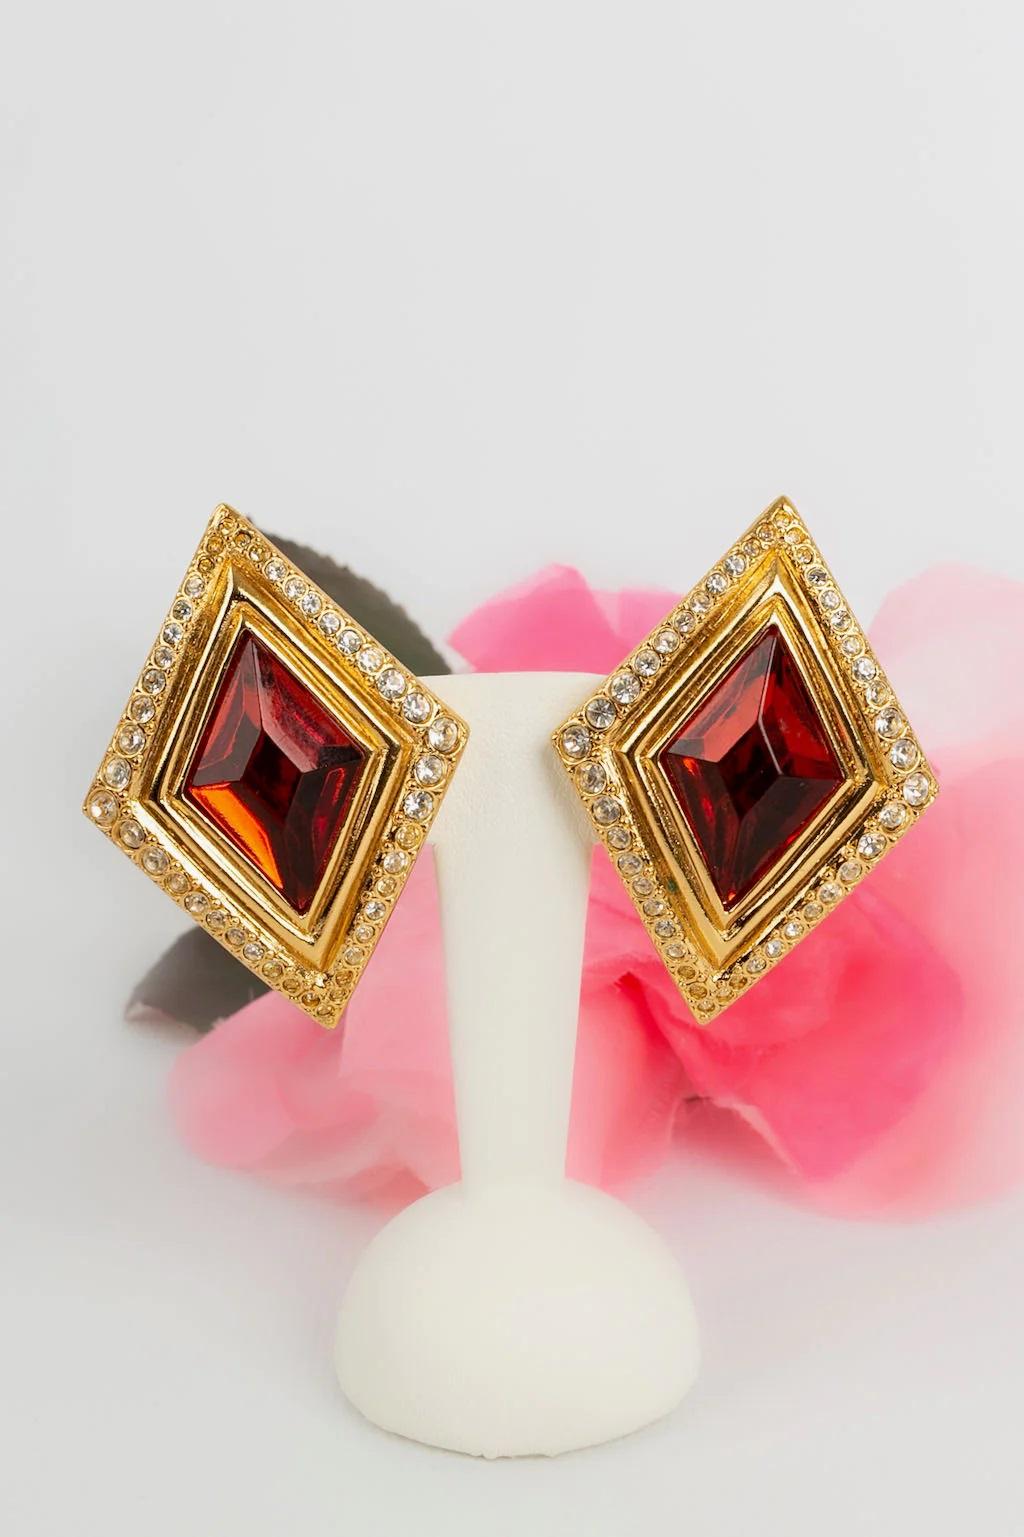 Jean-louis Scherrer Gold-Plated Metal Clip Earrings with Rhinestones For Sale 2